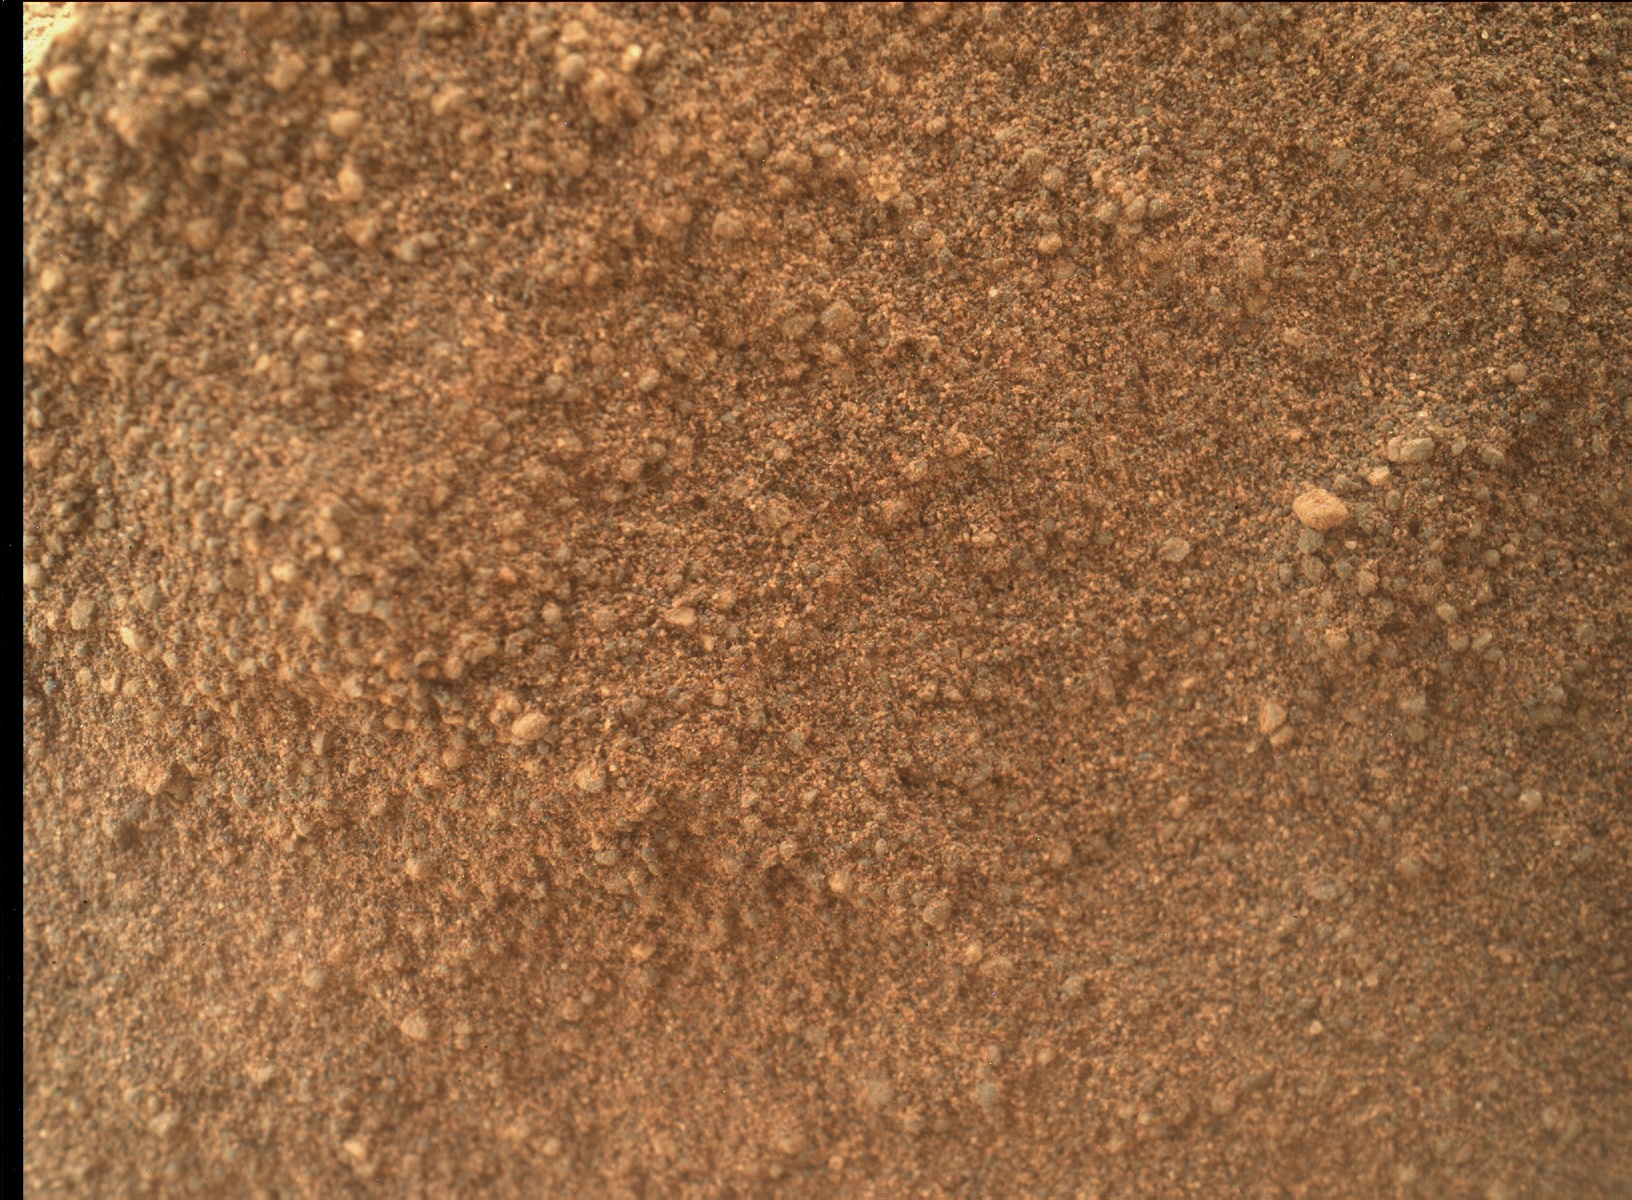 Nasa's Mars rover Curiosity acquired this image using its Mars Hand Lens Imager (MAHLI) on Sol 802